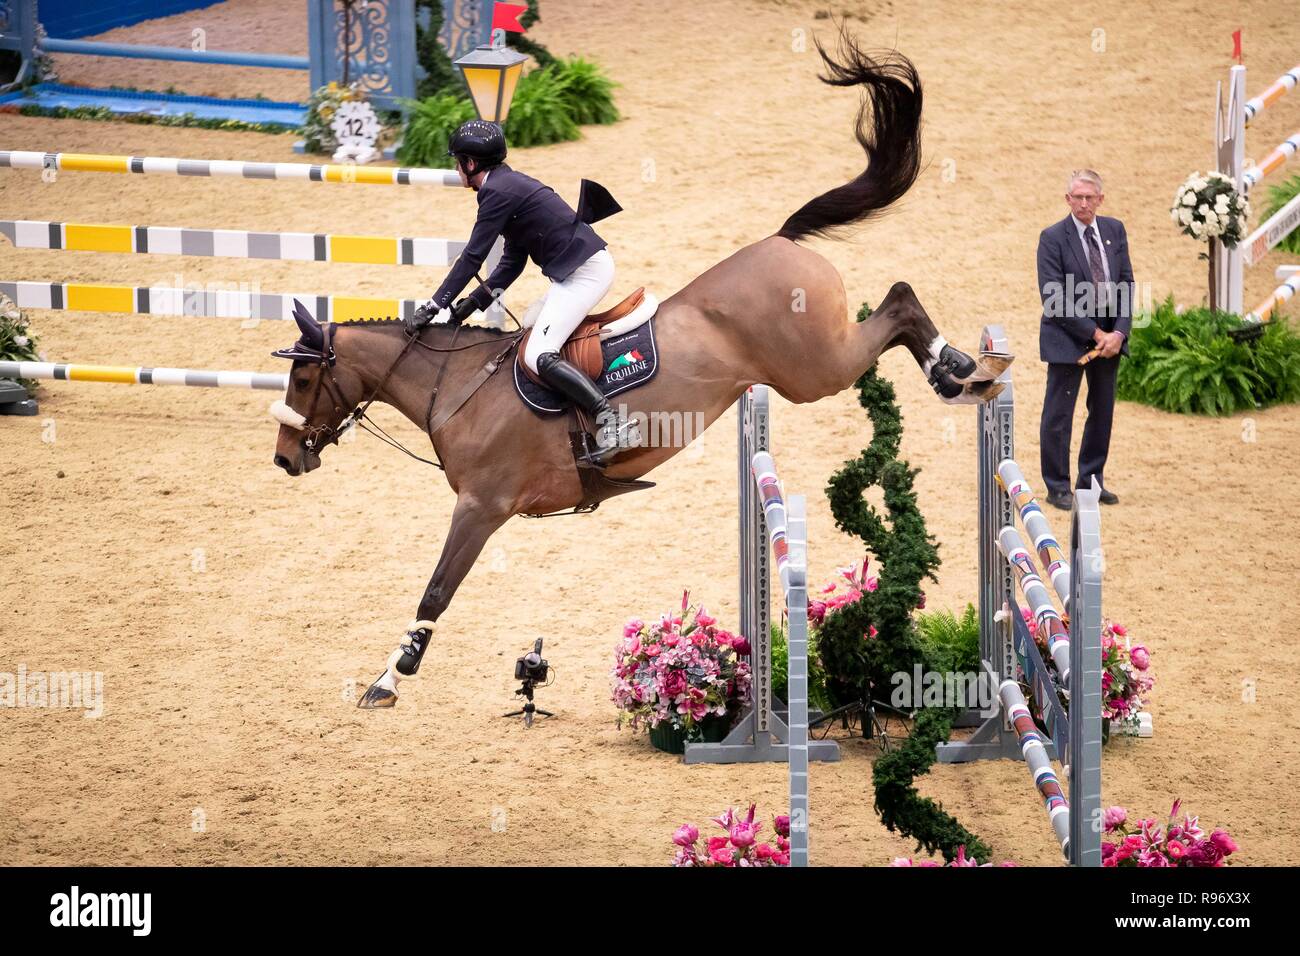 London, UK. 20th December, 2018. Winner. Darragh Kenny. IRL. Santa stakes. Showjumping. Olympia. The London International Horse Show. London. UK. . Credit: Sport In Pictures/Alamy Live News Stock Photo